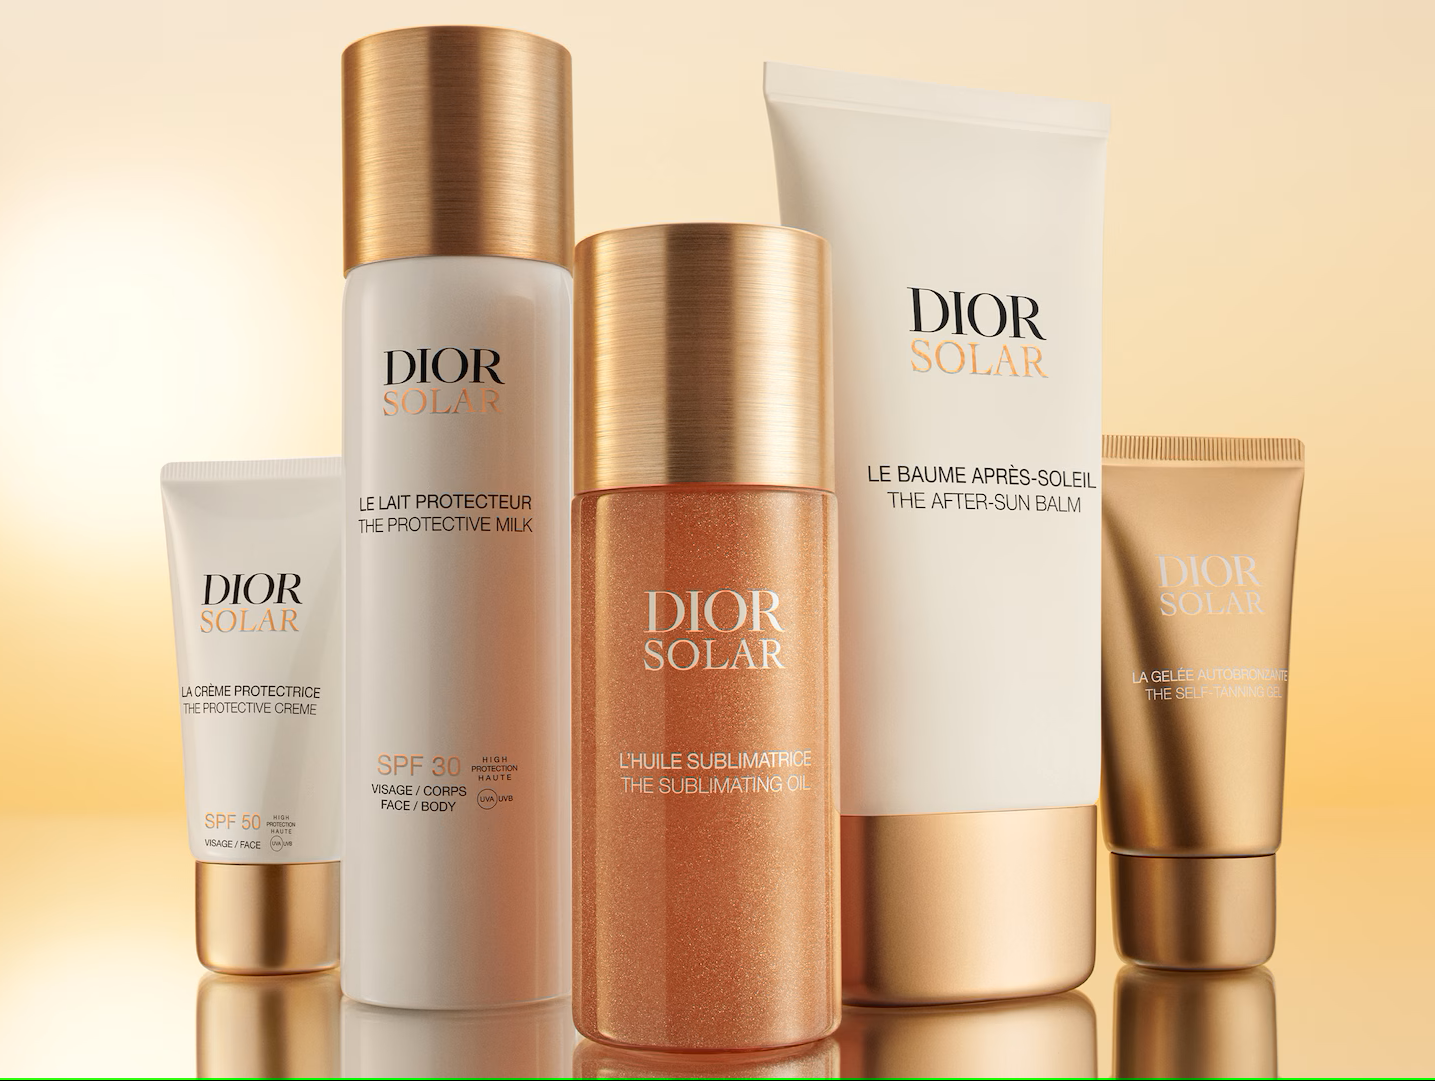 Dior New Skincare Line Solar Arrives Just in Time for Summer